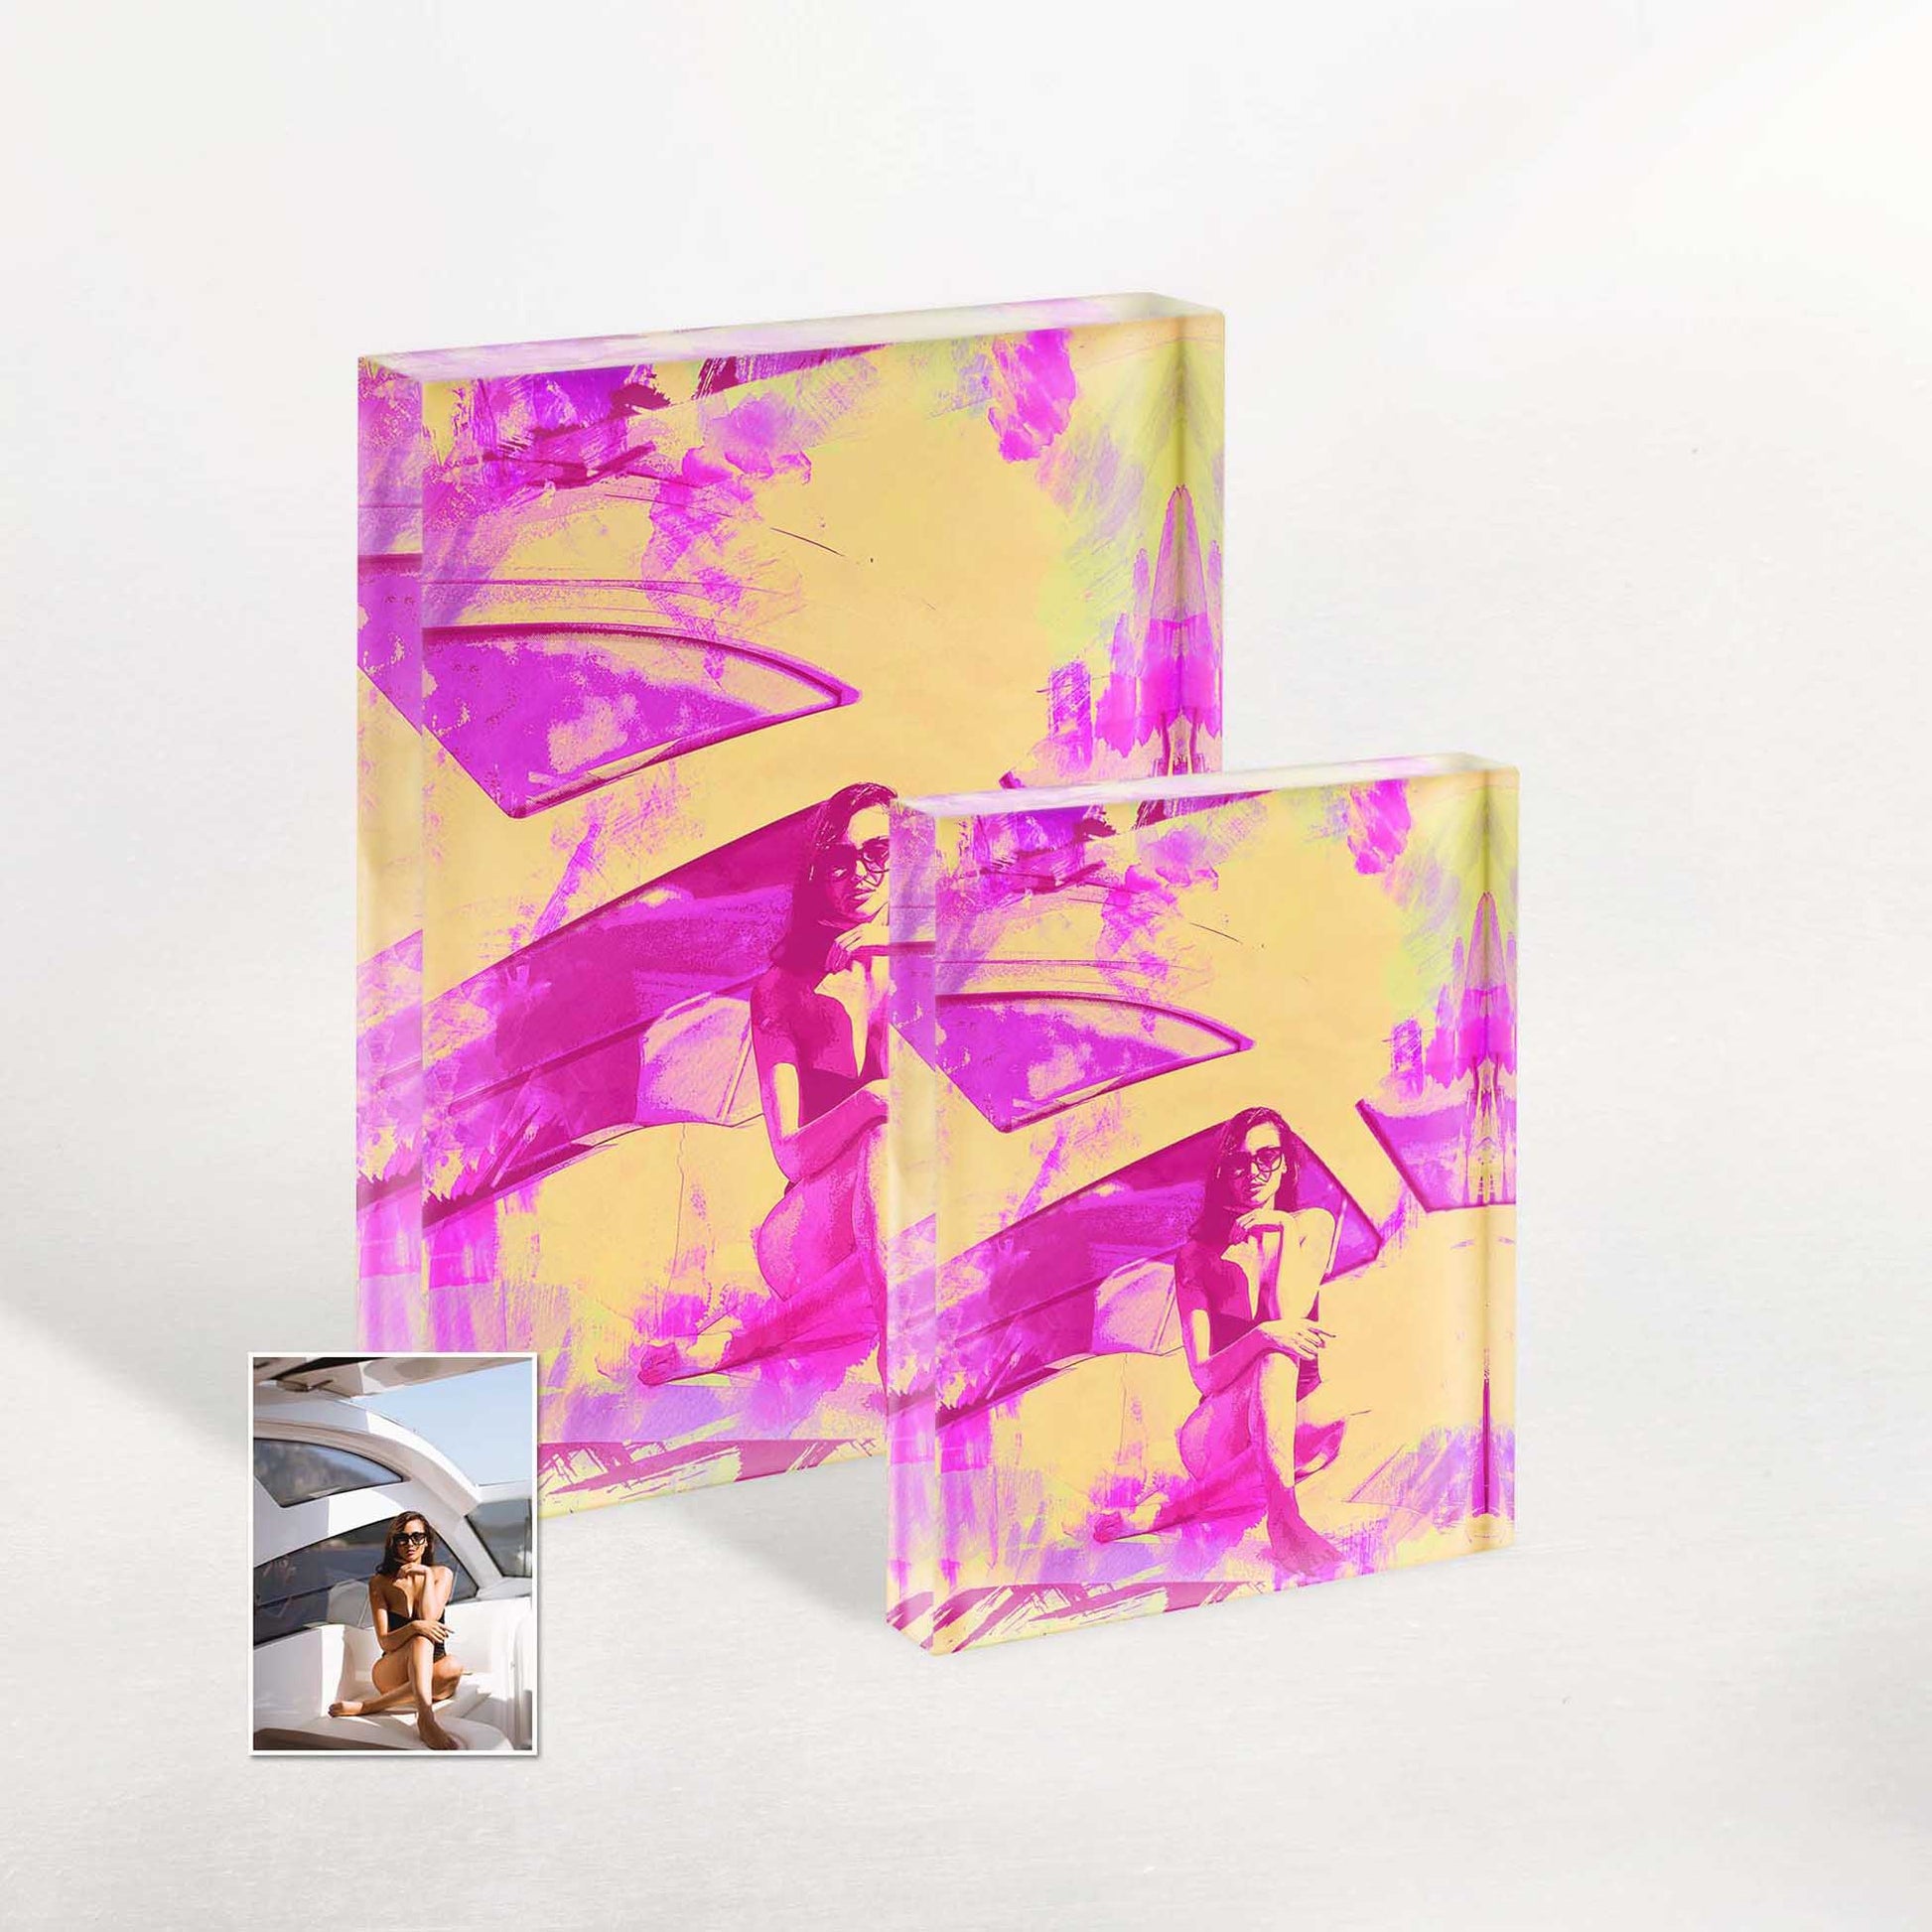 Surprise your loved ones with our Personalised Pink and Yellow Watercolor Acrylic Block Photo. Its captivating and vibrant colors bring a sense of excitement and joy, making it a cool and memorable gift for anniversaries or birthdays.